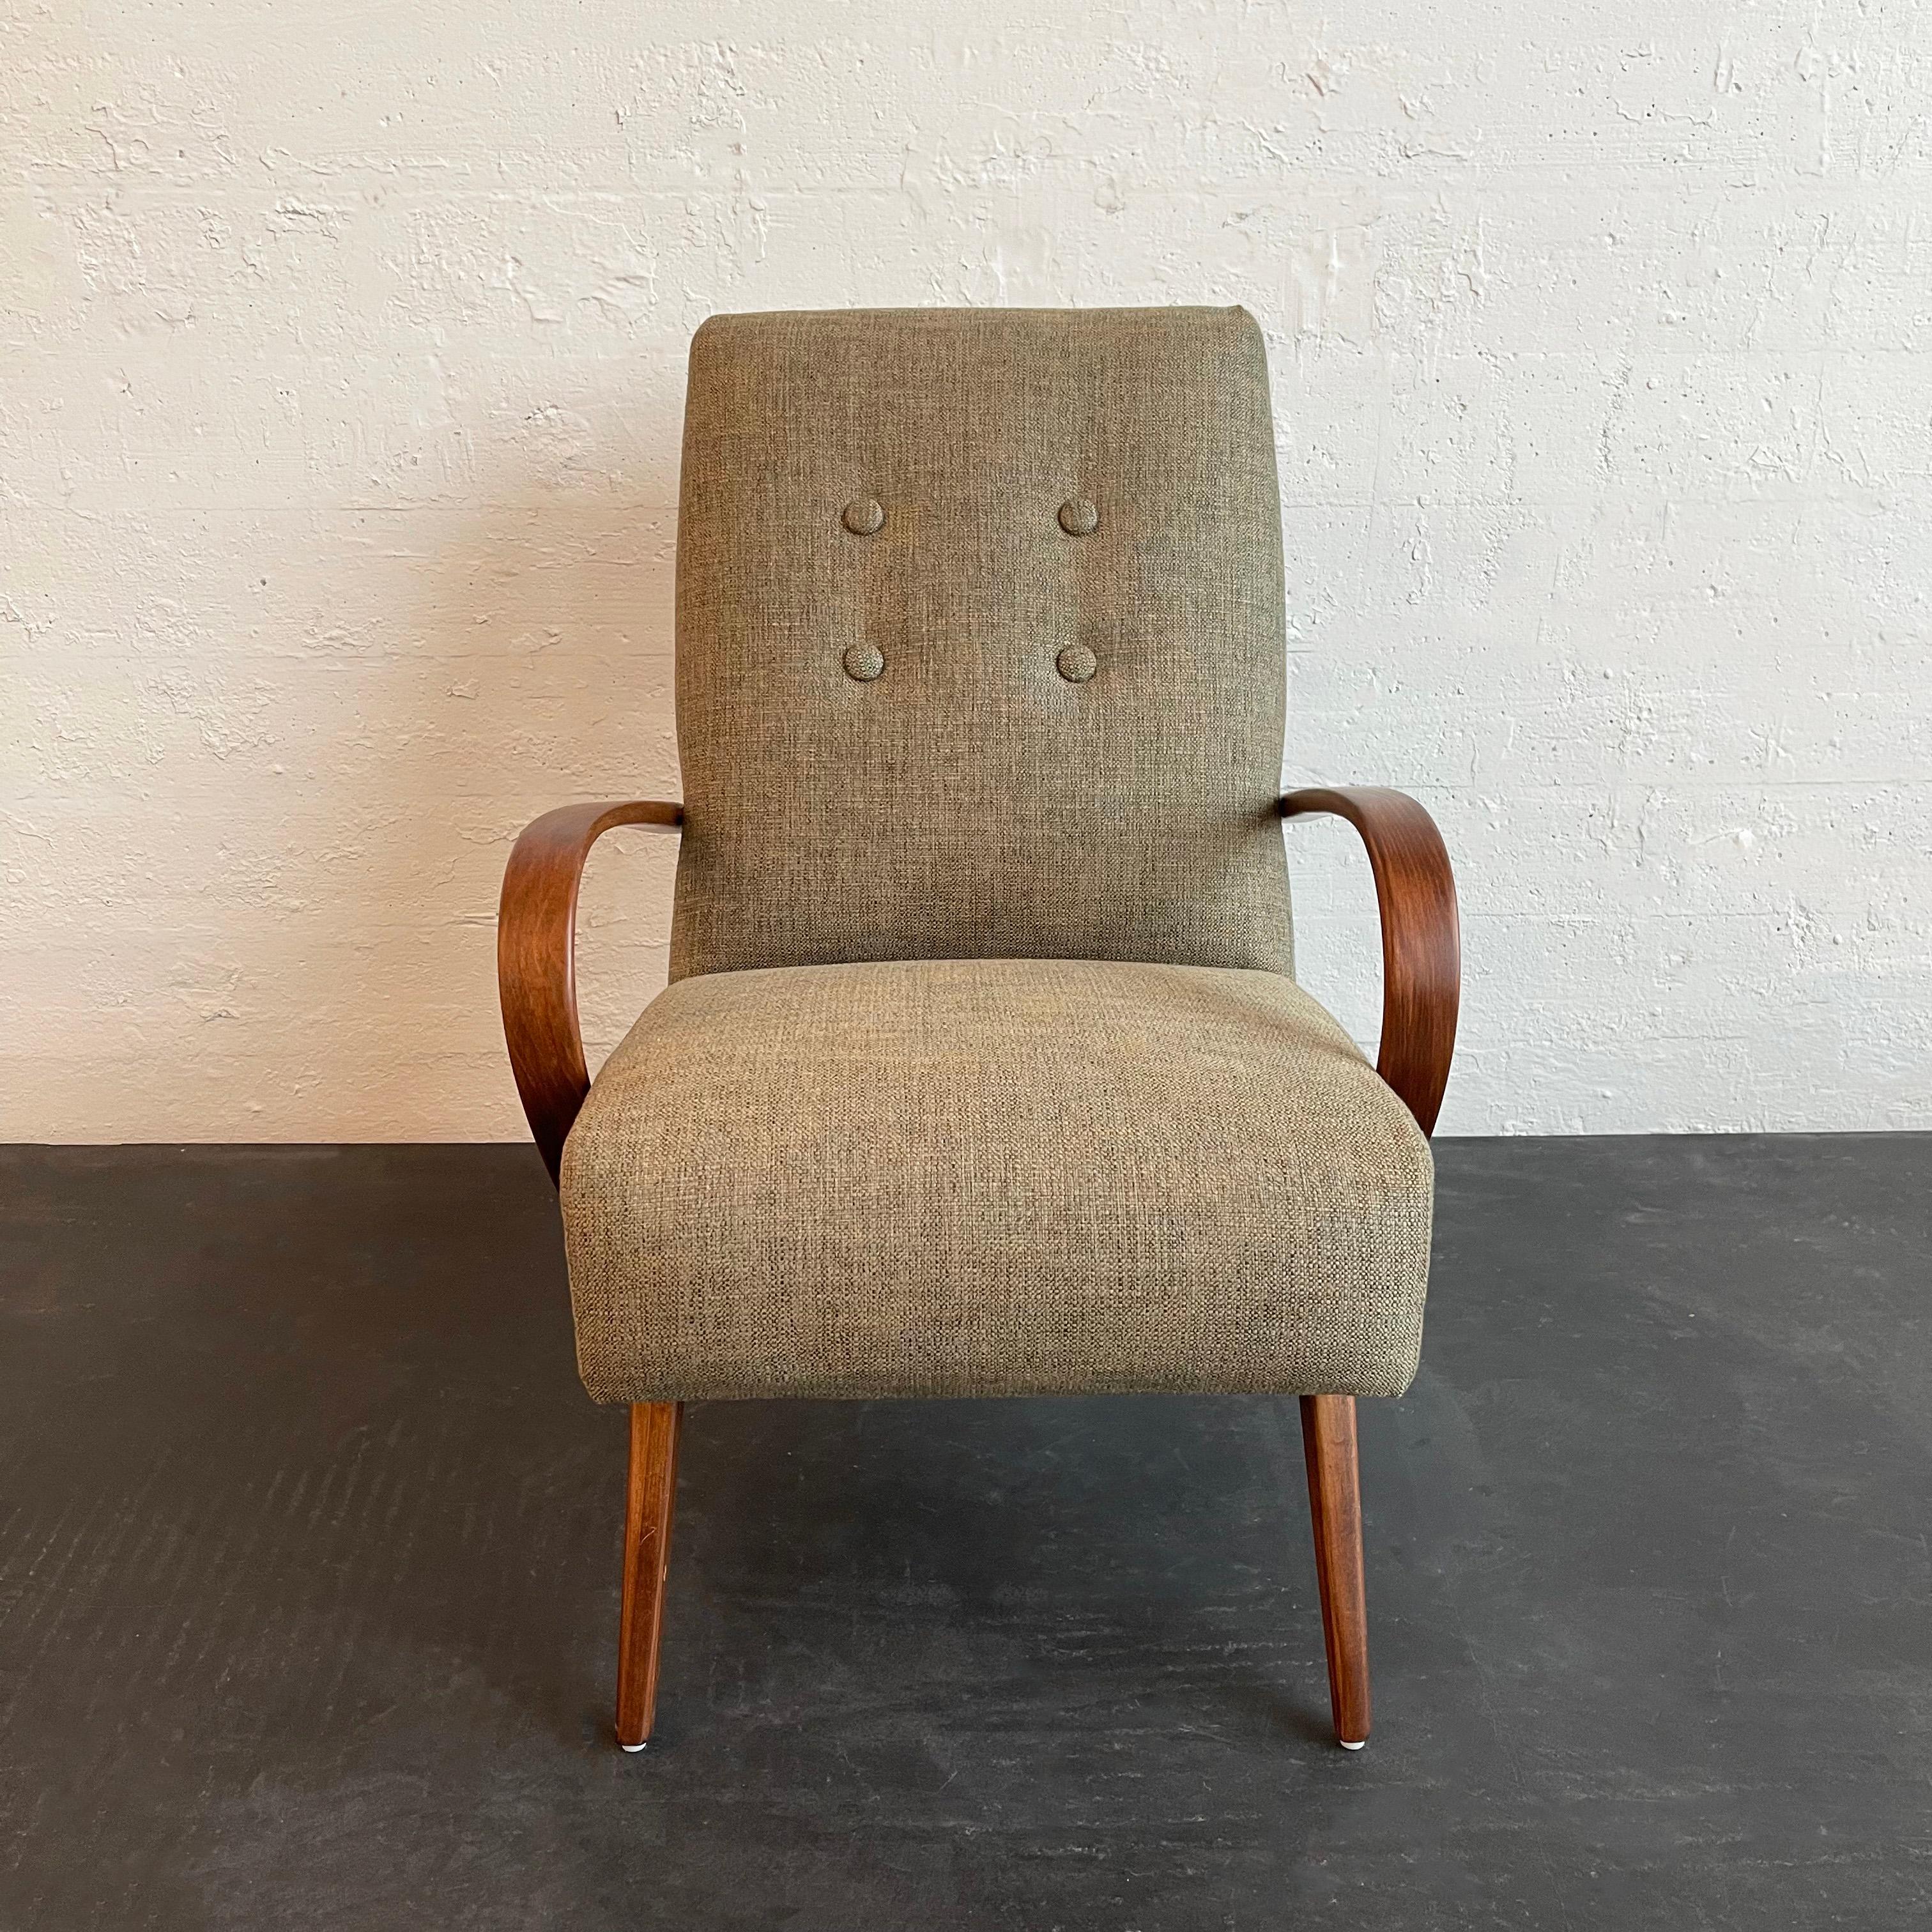  Mid-Century Modern Bentwood Upholstered Armchair By Jaroslav Smidek In Good Condition For Sale In Brooklyn, NY